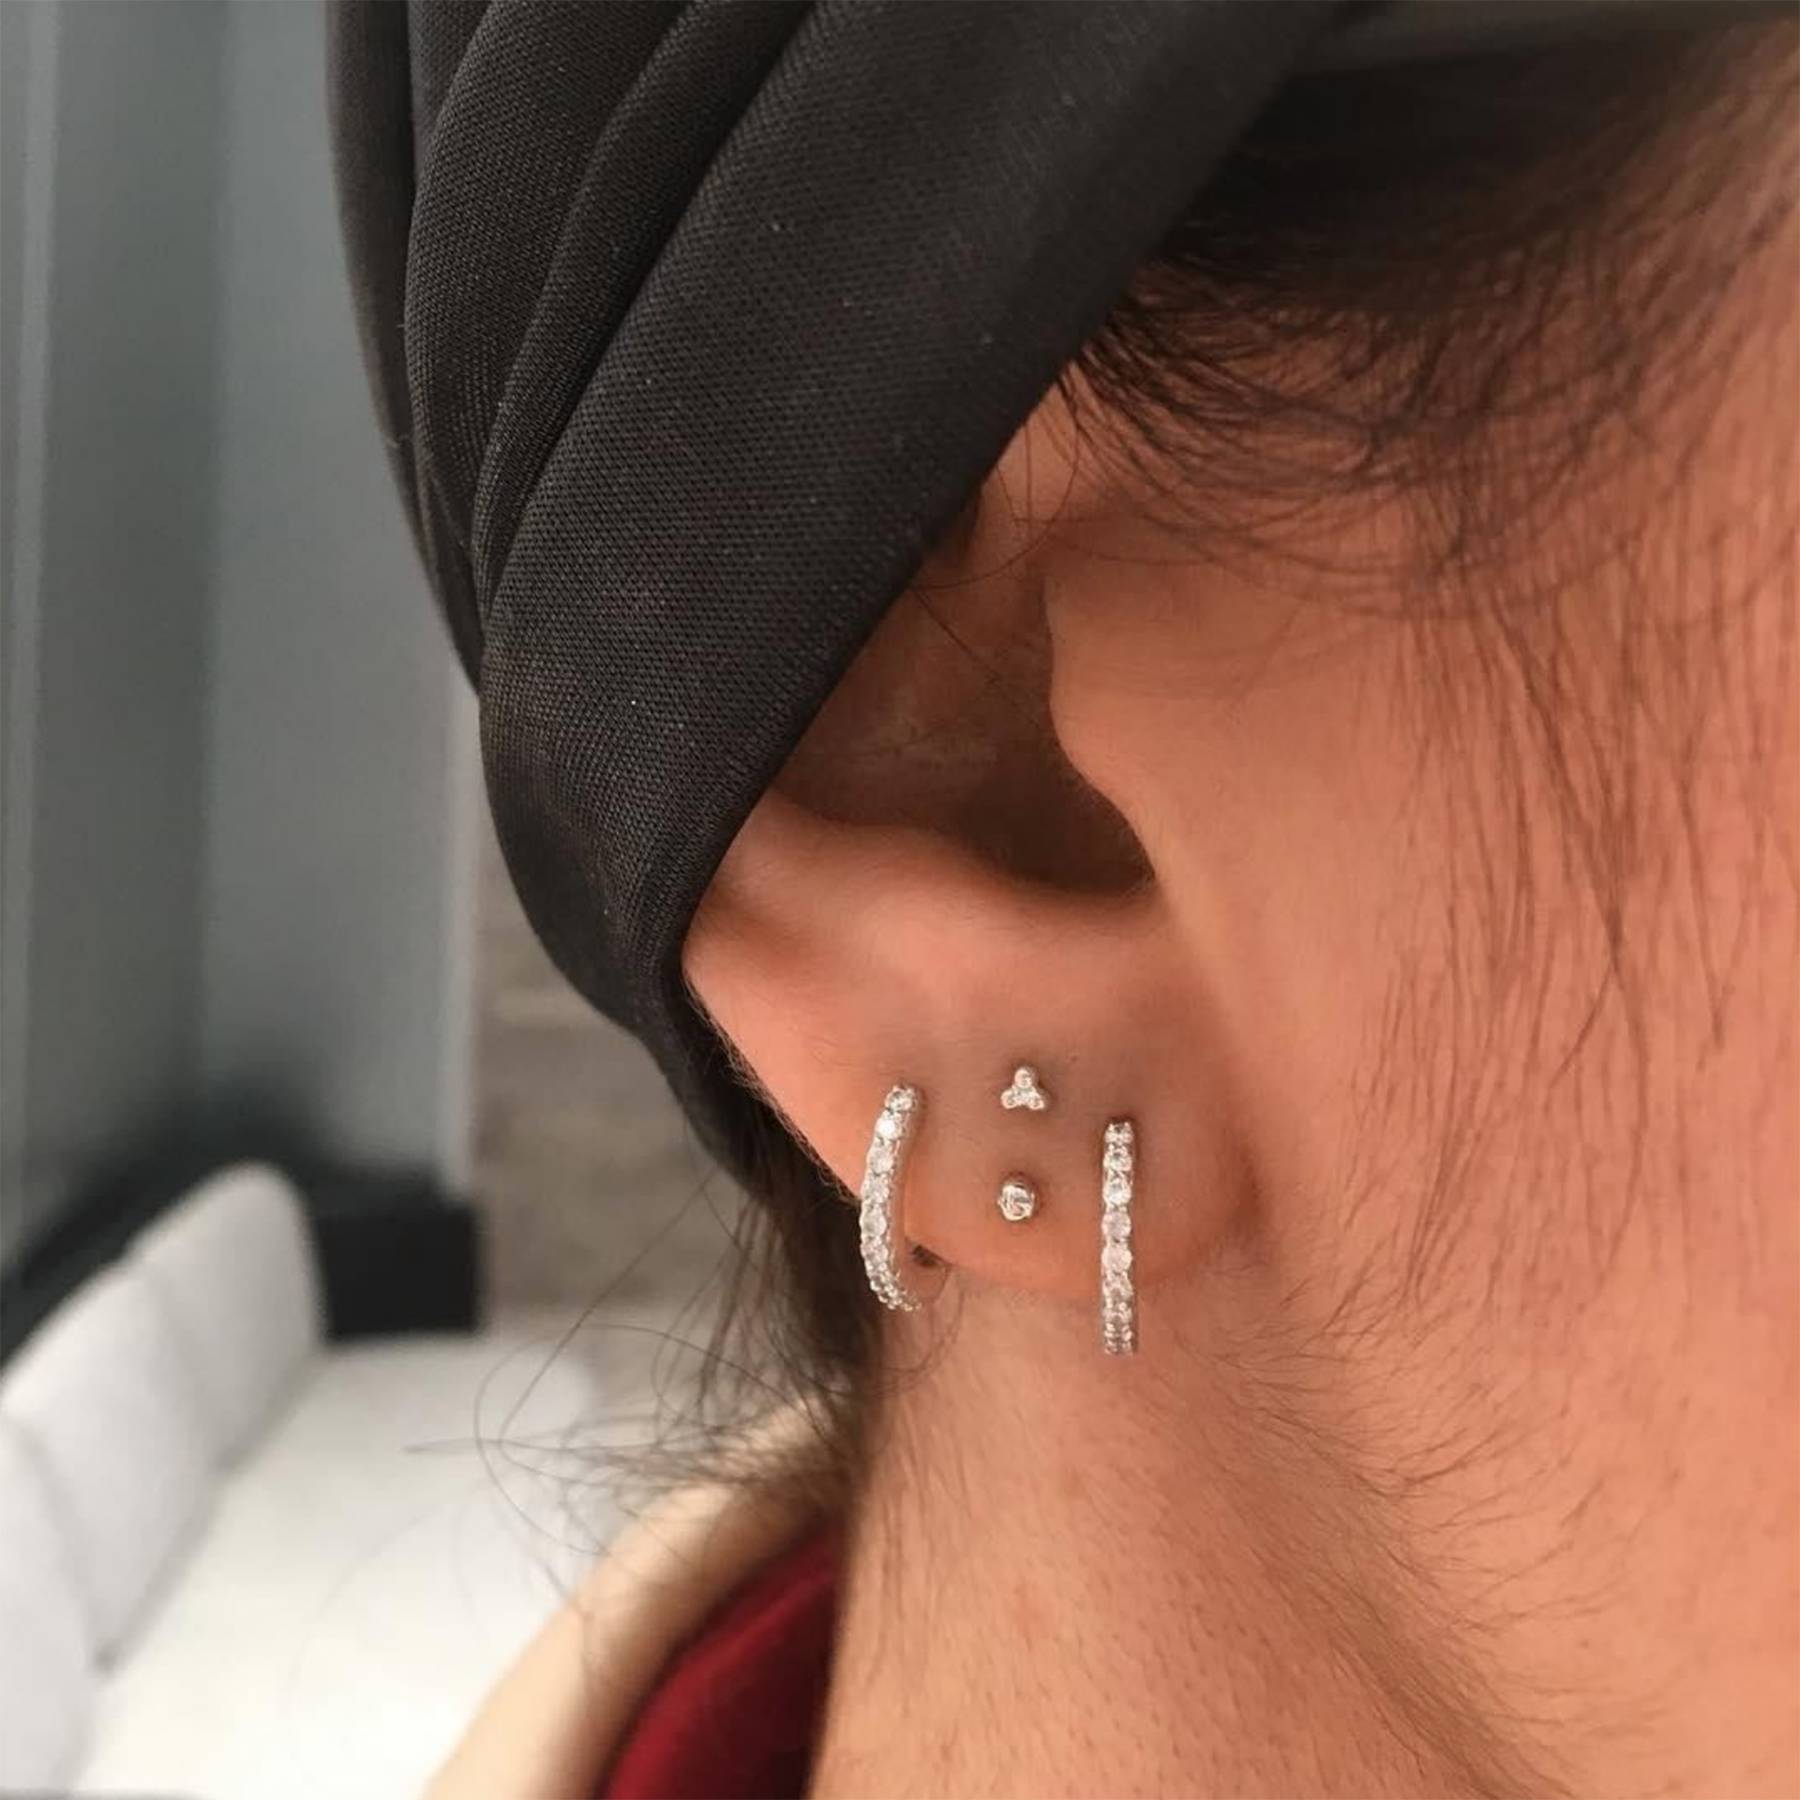 Types Of Ear Piercings: How Much They 